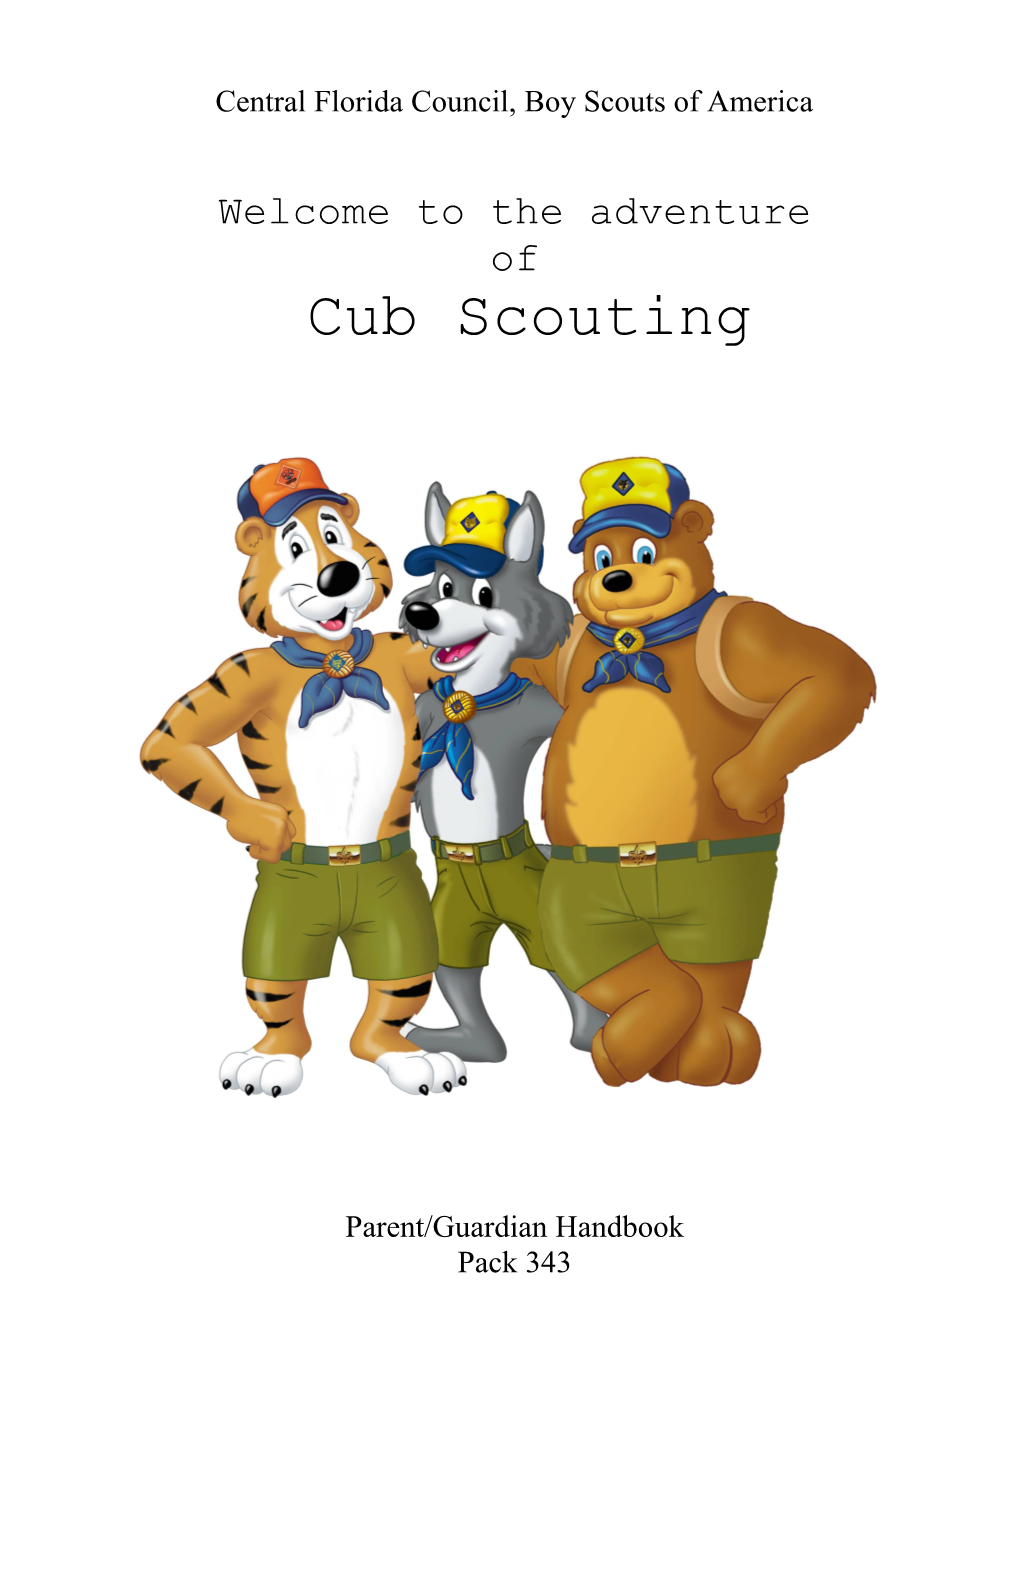 Central Florida Council, Boy Scouts of America